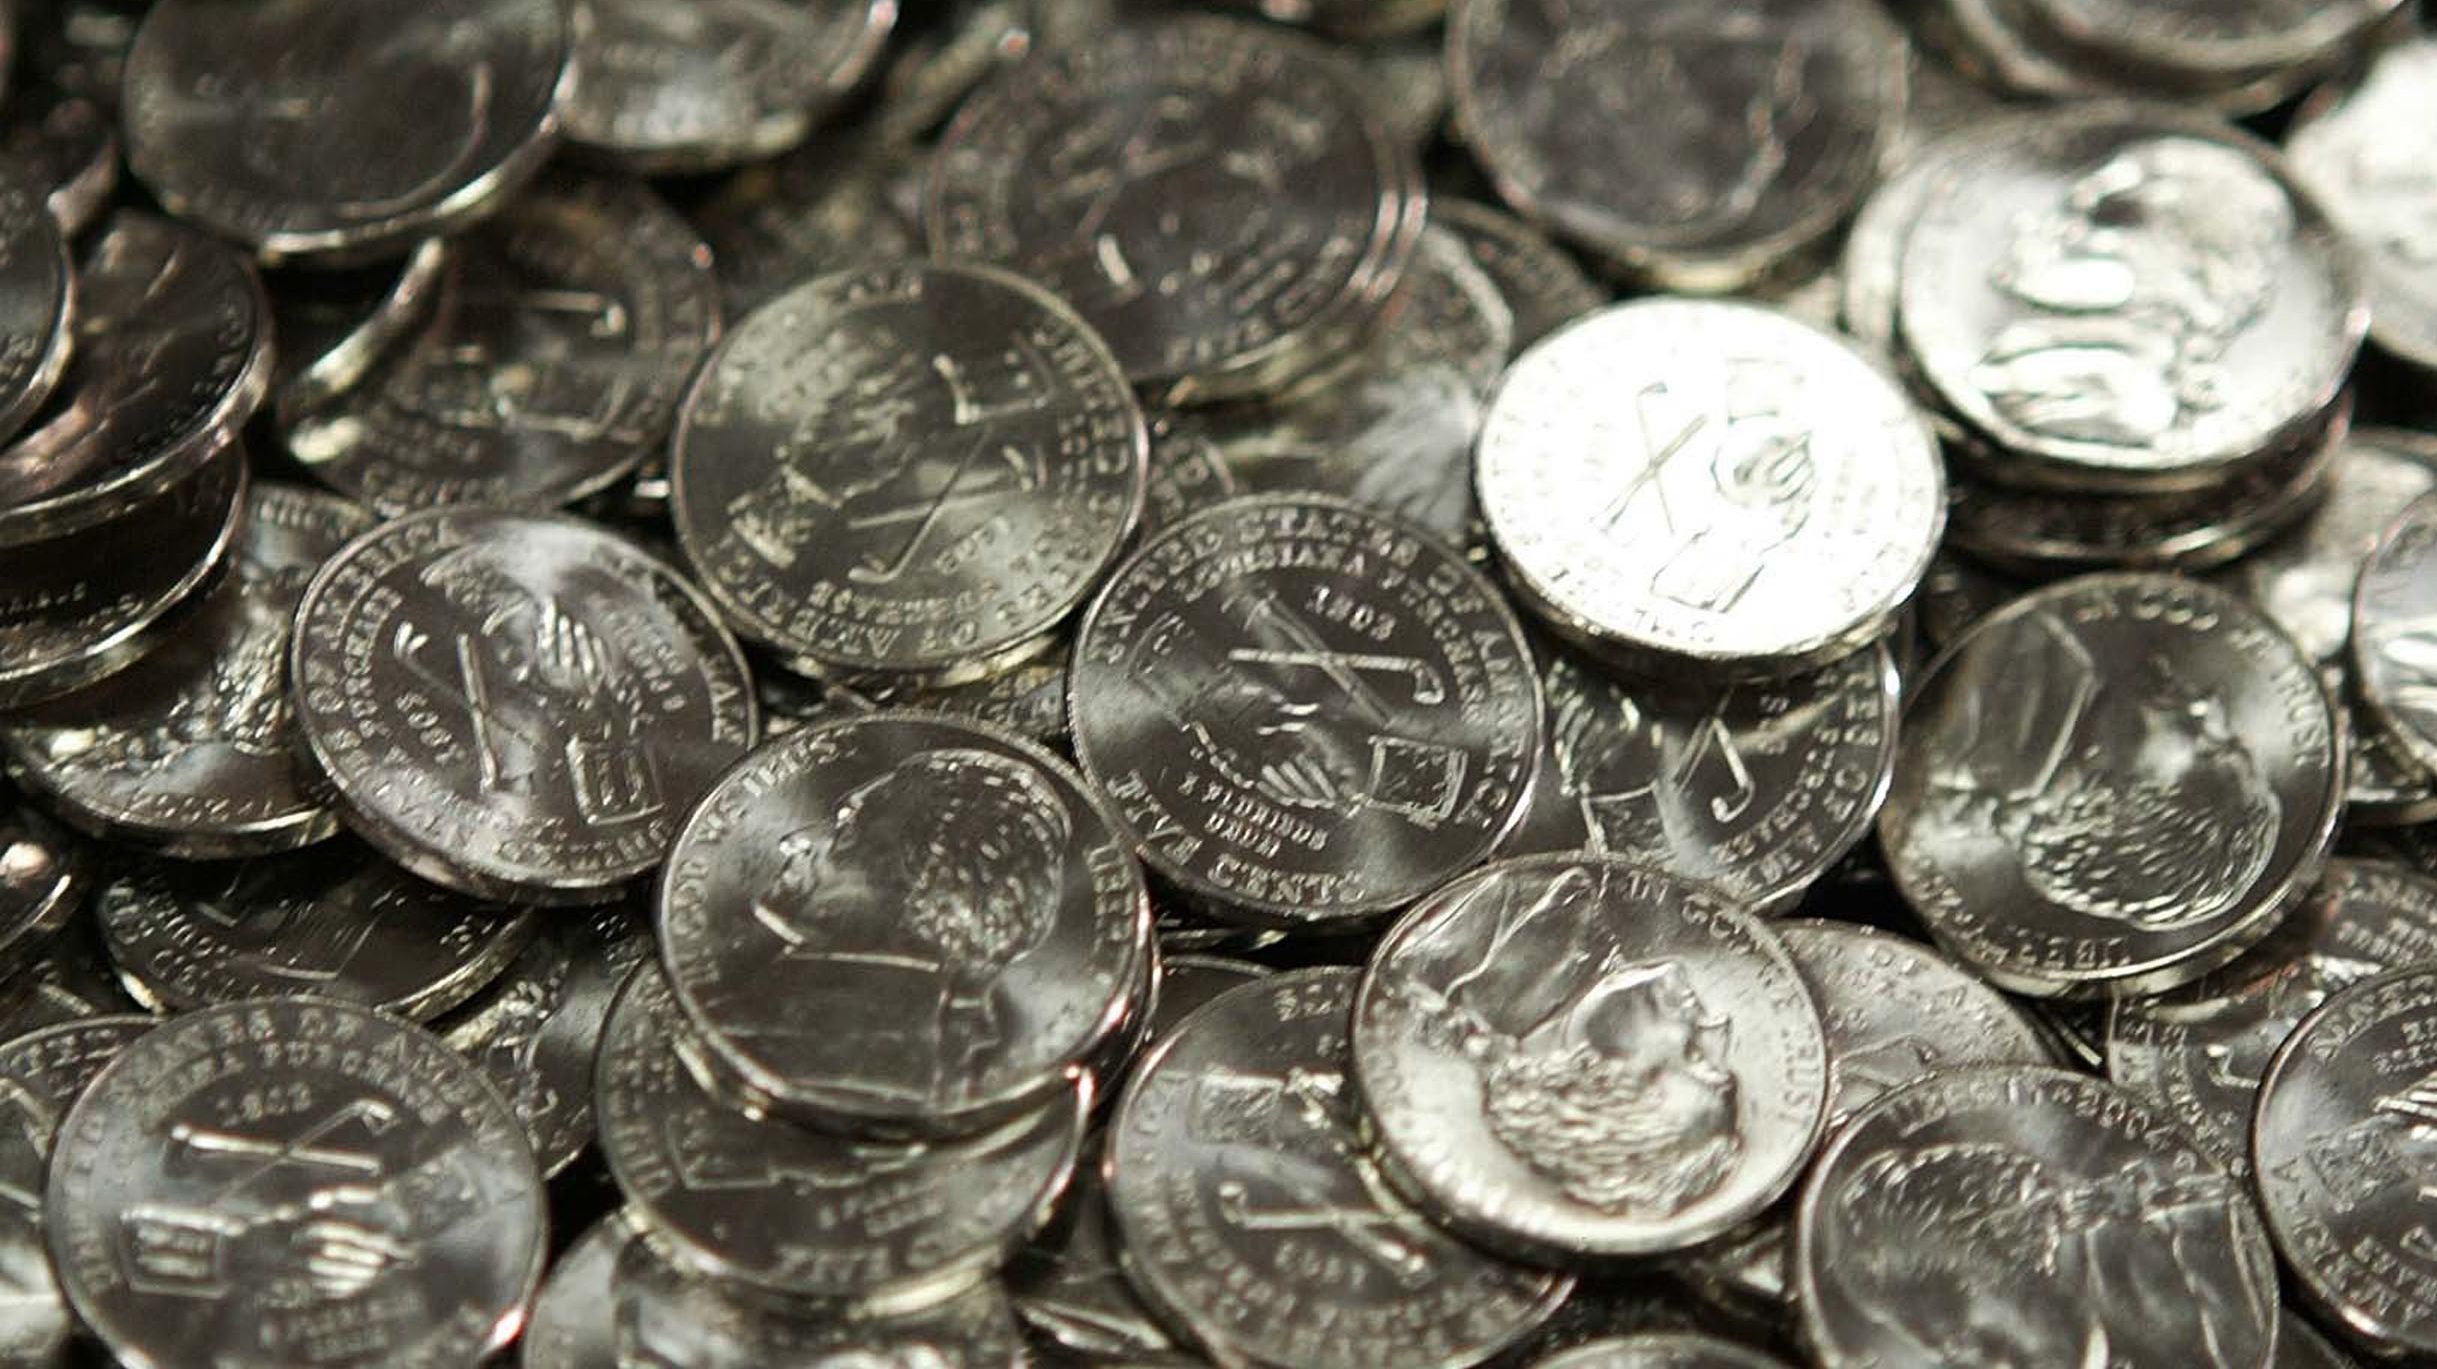 15 Valuable Coins That May Be In Your Coin Jar | Mental Floss